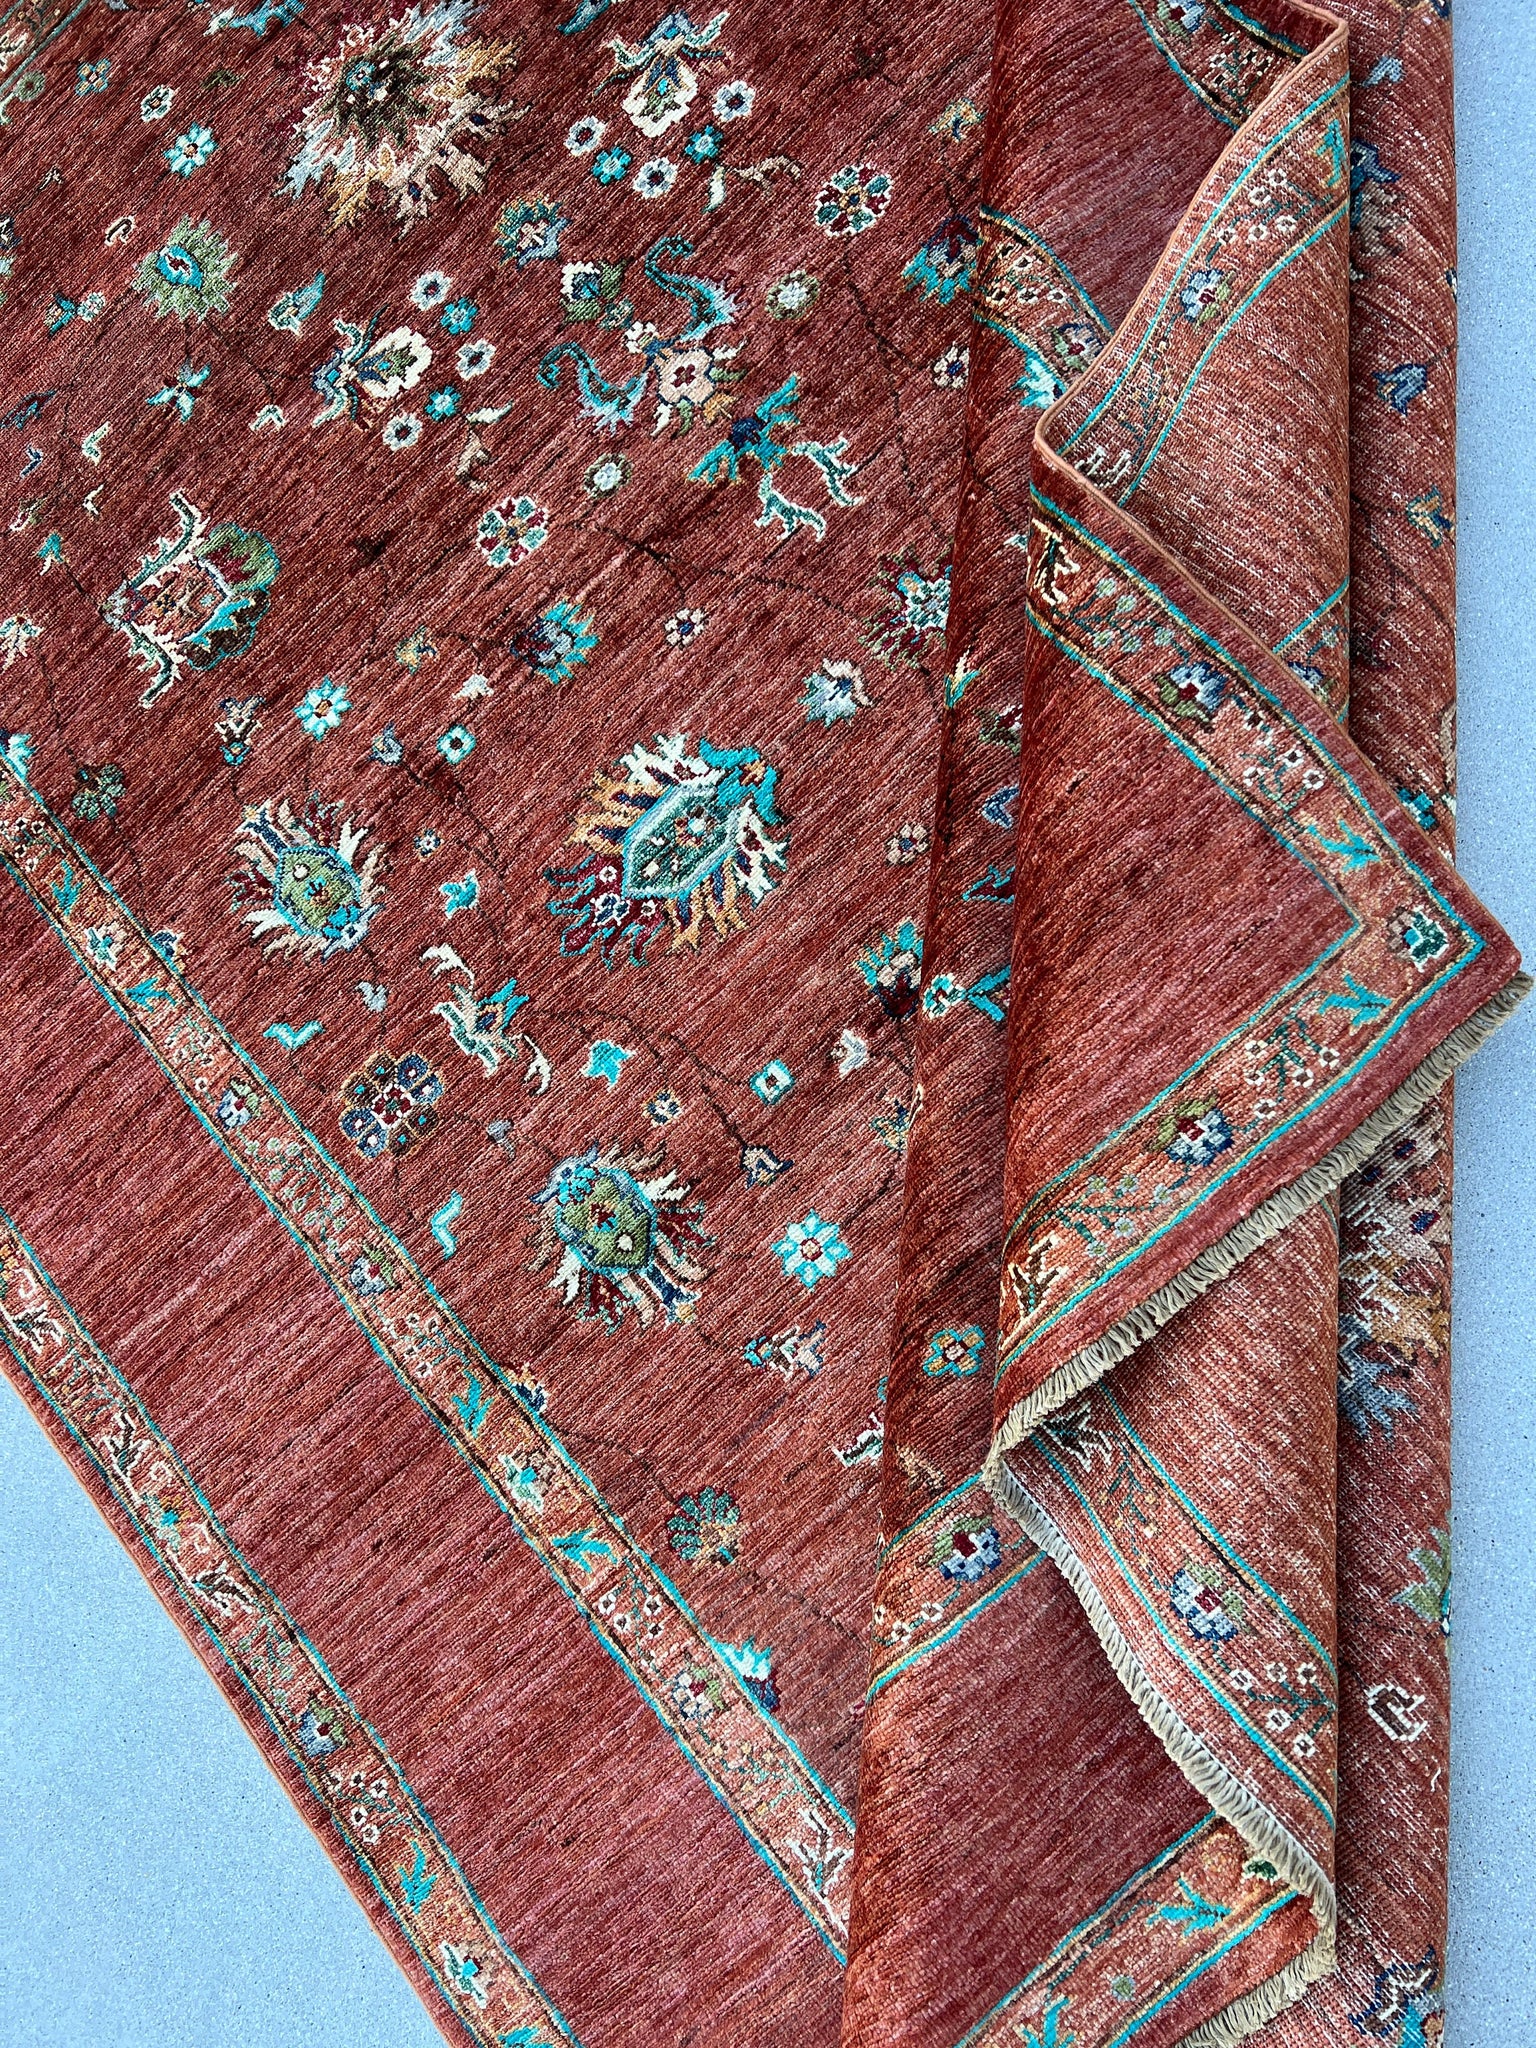 6x8 (180x245) Hand Knotted Afghan Rug | Caramel Teal Turquoise Cream Beige Blush Pink Moss Green Brown | Floral Wool Boho Turkish Persian